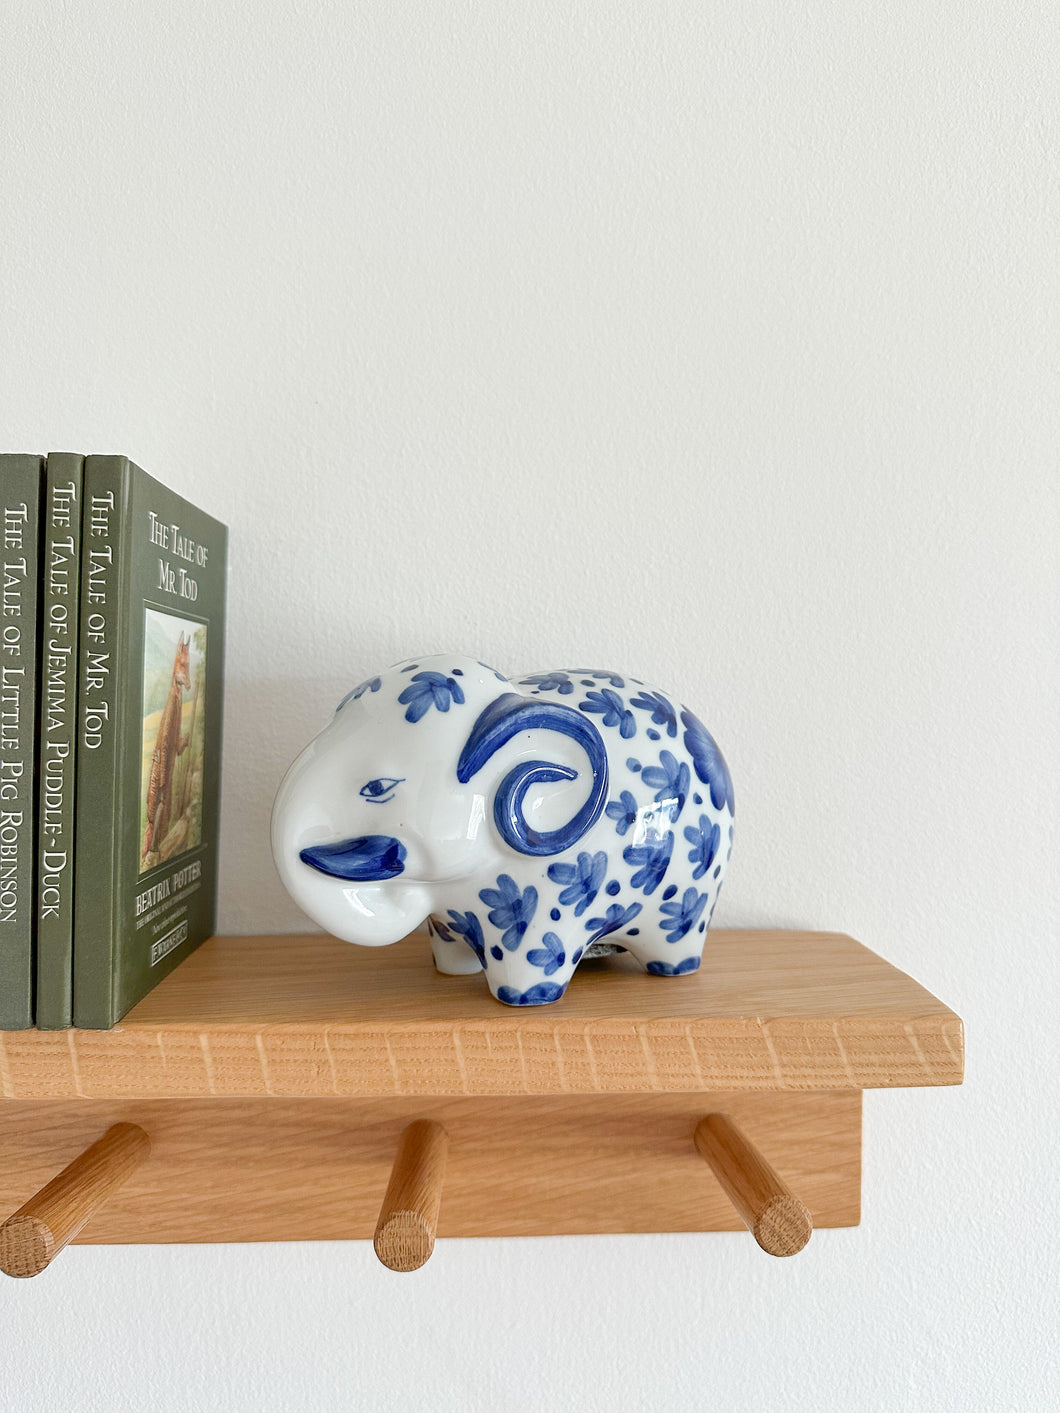 Vintage ceramic elephant piggy bank or money box, in blue and white - Moppet